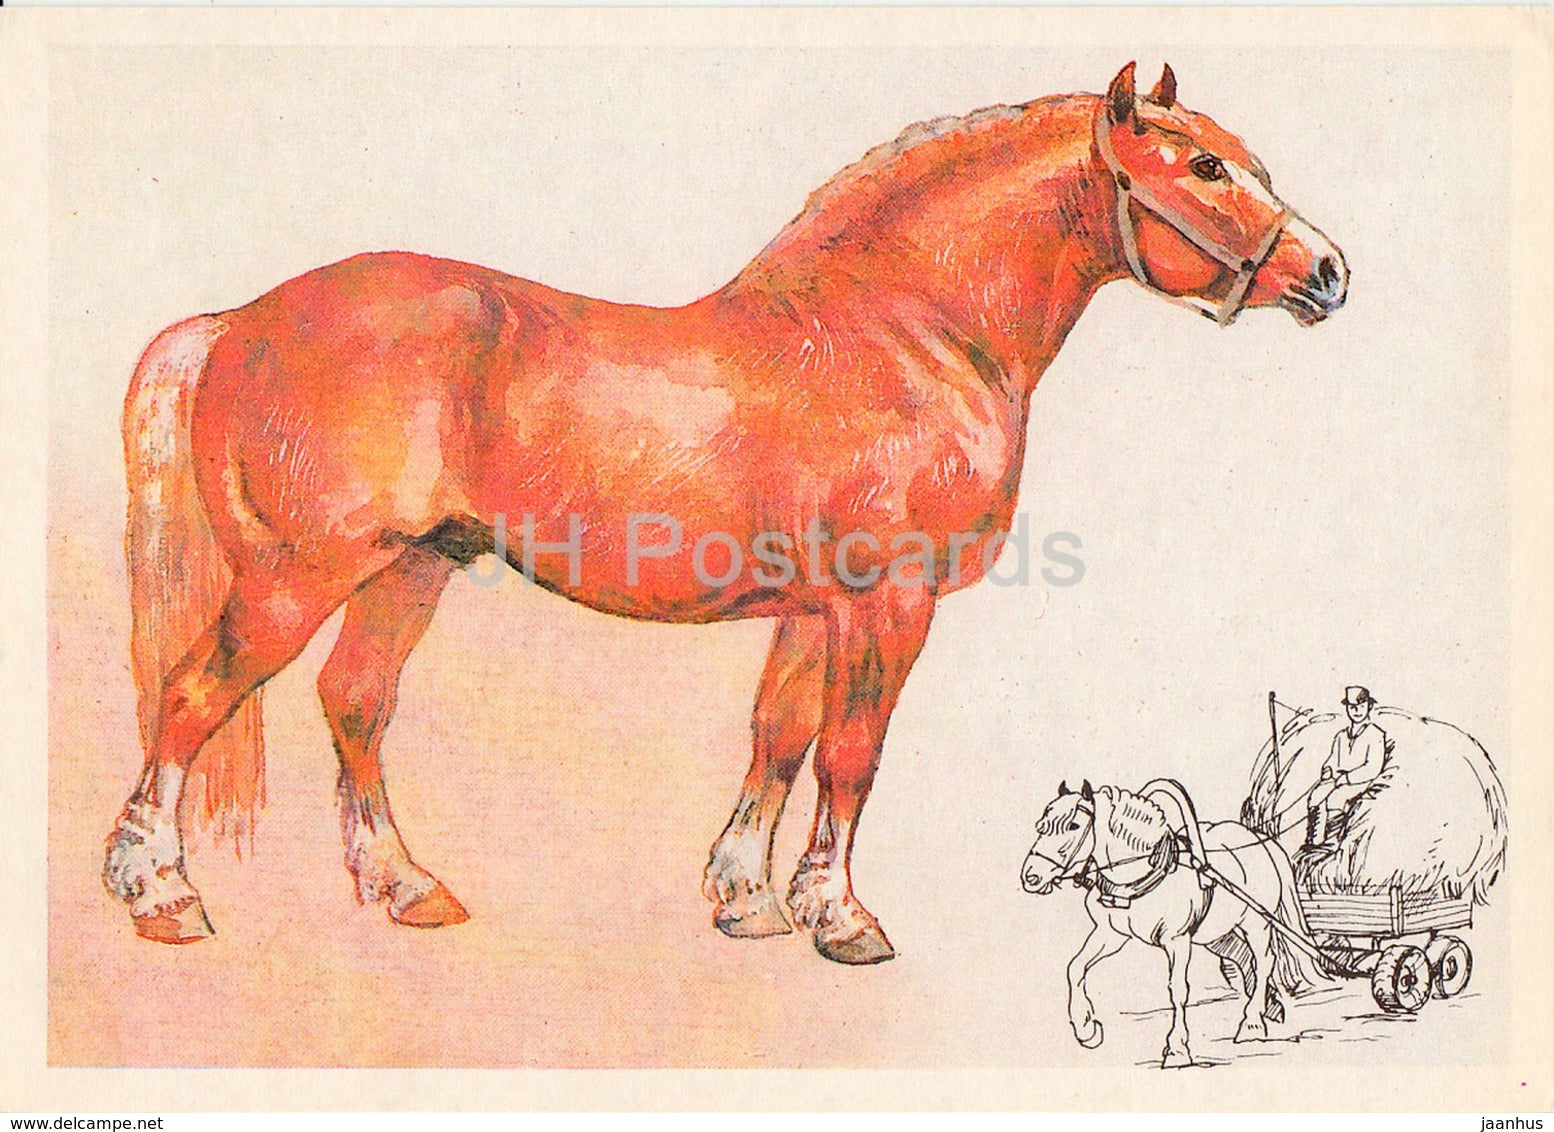 The Soviet Heavy Draft Horse - illustration by A. Glukharev - horses - animals - 1988 - Russia USSR - unused - JH Postcards